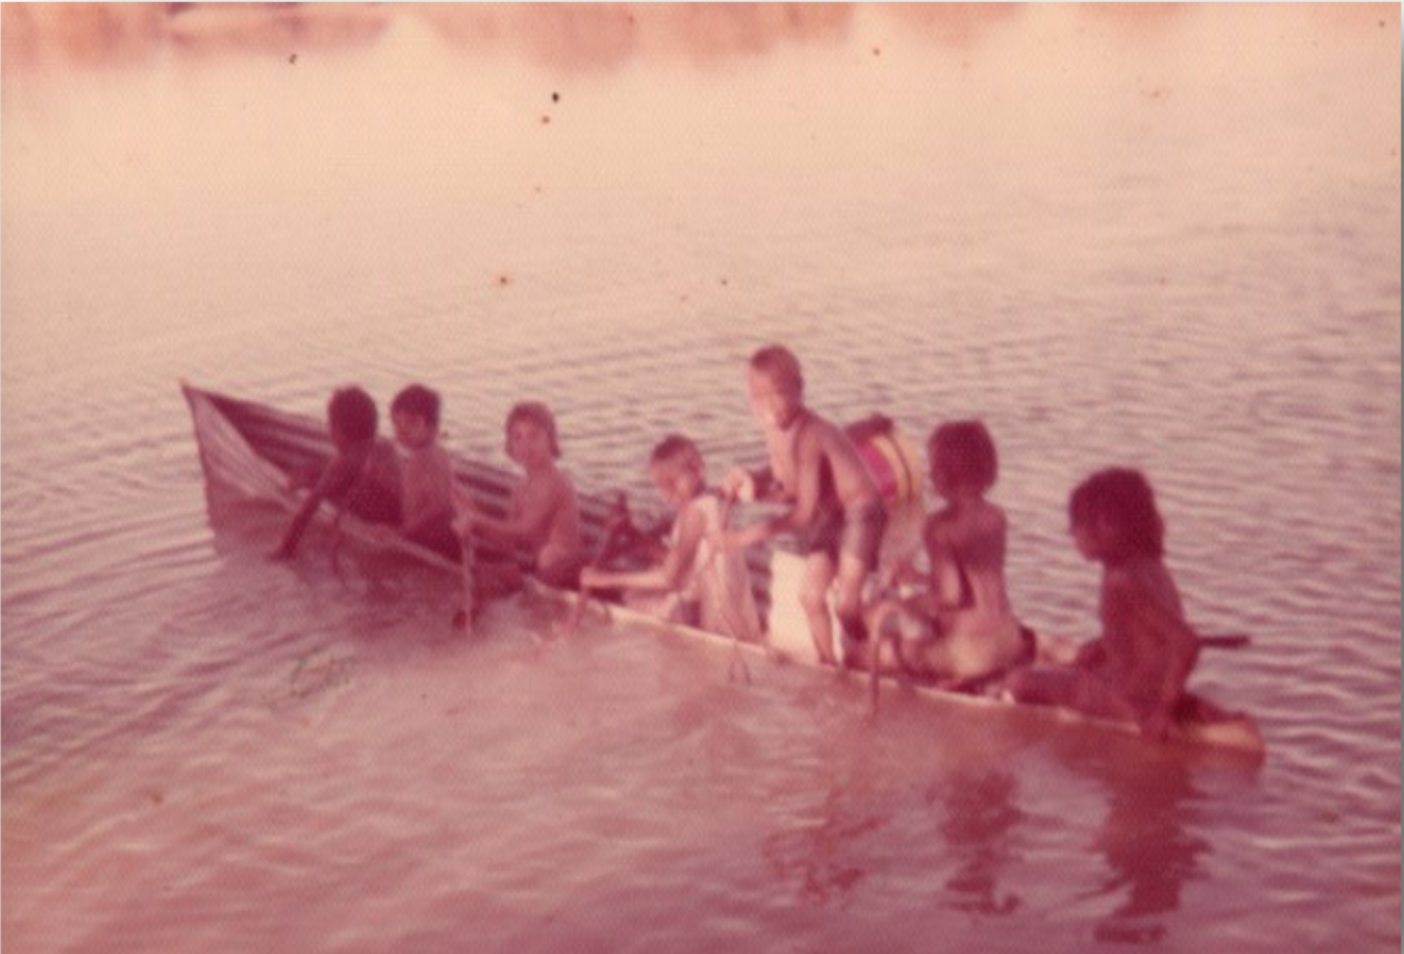 Brendan & Damien with family early 1970’s, visiting Warrabri NT (now Ali Curung) pictures Olive